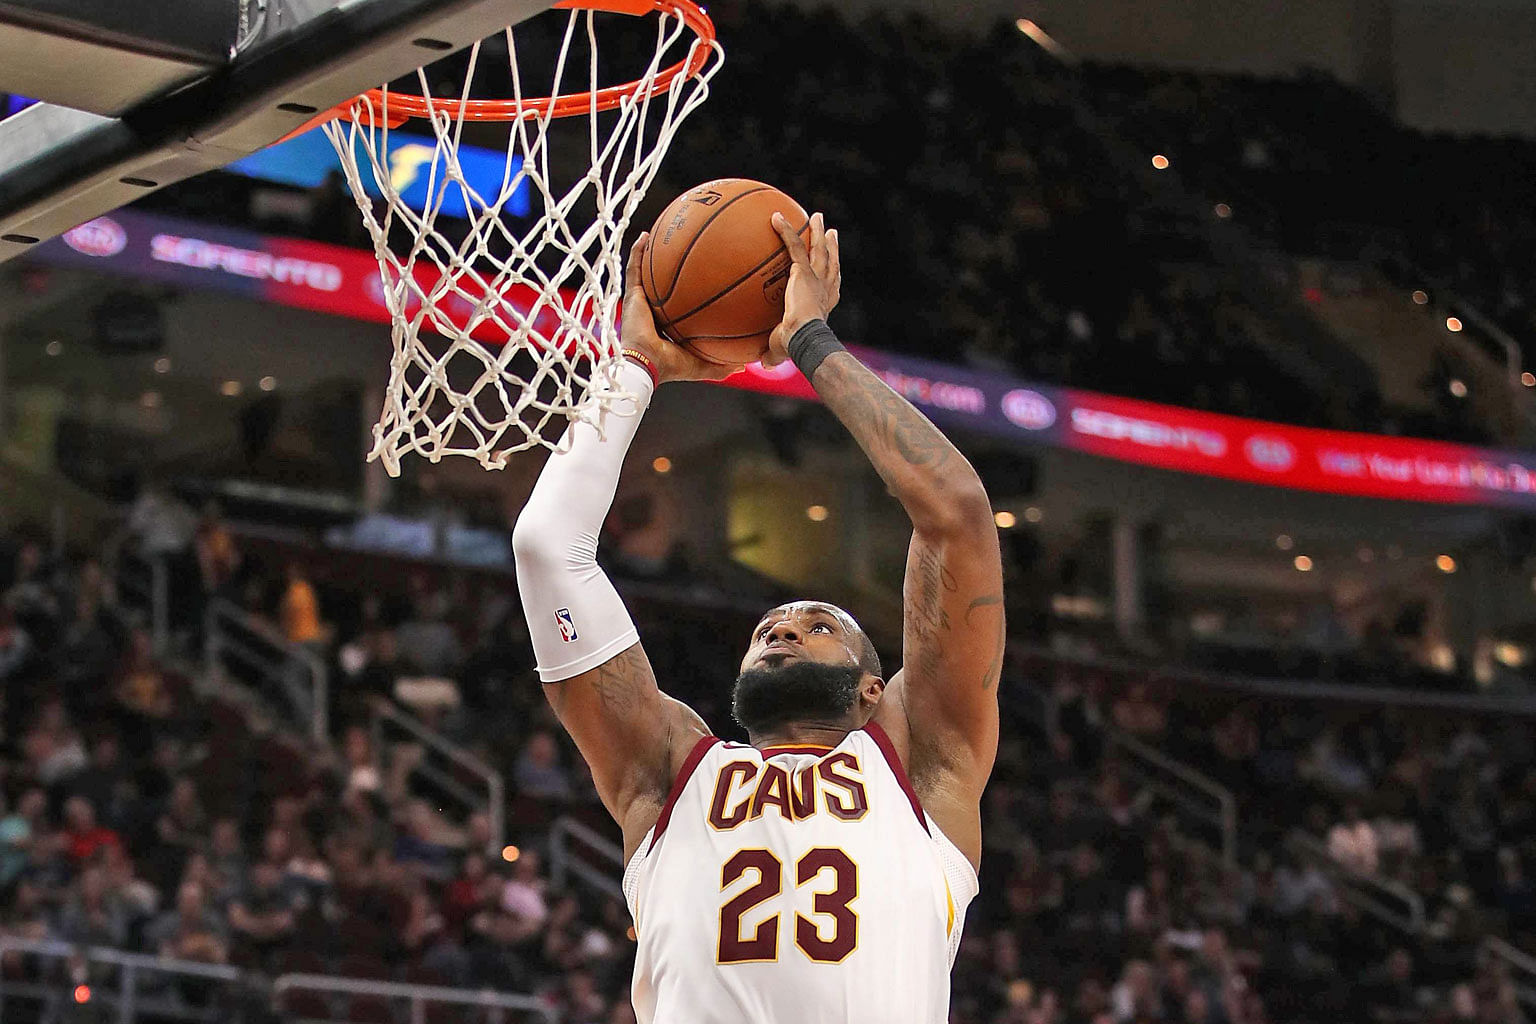 LeBron James scored 17 points against Chicago in their pre-season game but came away with a sore ankle.